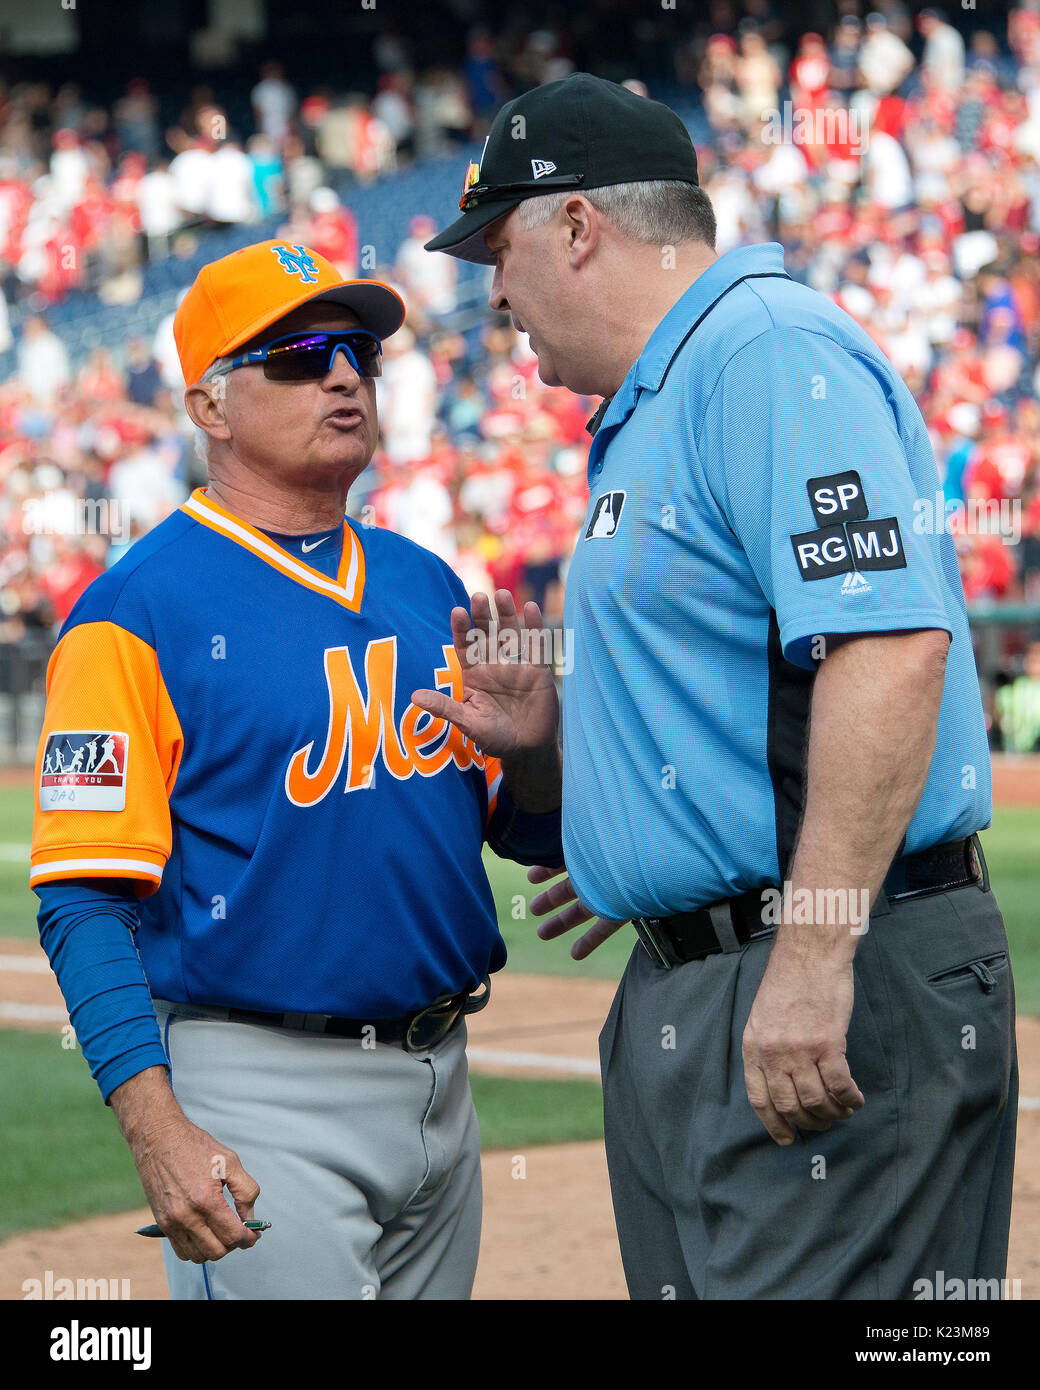 New York Mets manager Terry Collins (10) argues with umpire and crew chief Bill Welke (3) after they called for a replay of the game-ending play at home plate in the first game of a double-header pitting the New York Mets against the Washington Nationals at Nationals Park in Washington, DC on Sunday, August 27, 2017. The Mets held on to win the game 6 - 5. Credit: Ron Sachs/CNP (RESTRICTION: NO New York or New Jersey Newspapers or newspapers within a 75 mile radius of New York City) - NO WIRE SERVICE - Photo: Ron Sachs/Consolidated/dpa Stock Photo